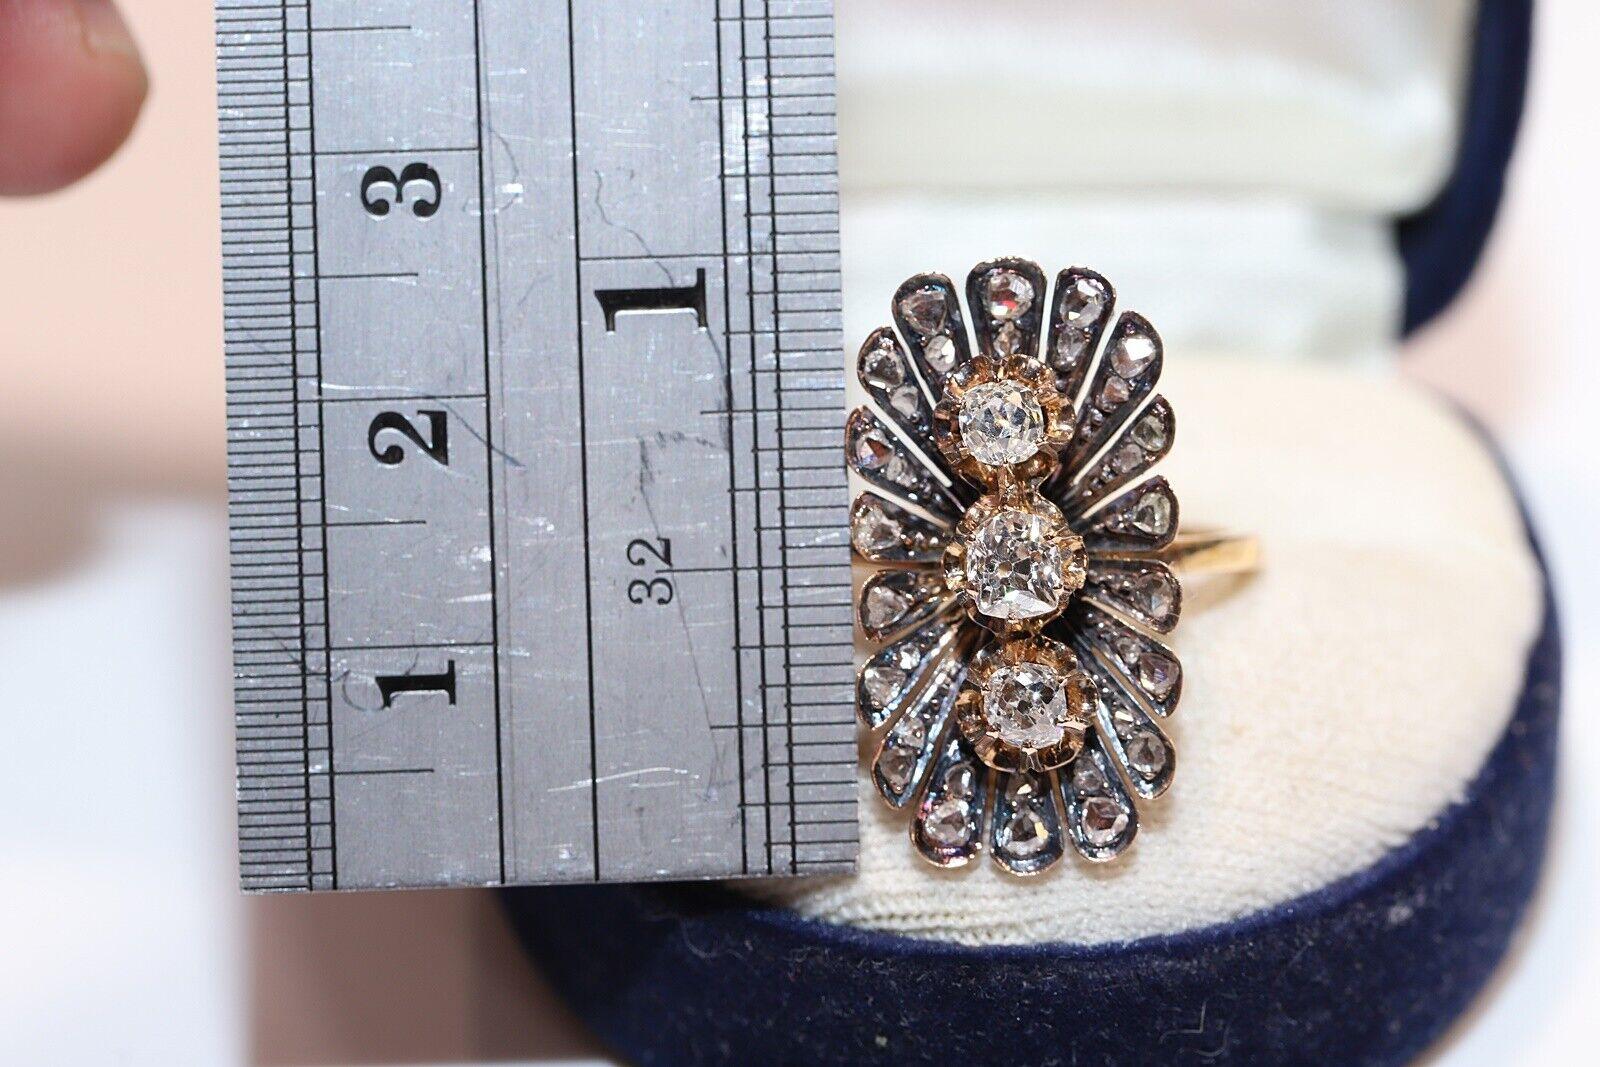 In very good condition.
Total weight is 6.6 grams.
Totally is old cut diamond 0.75 carat.
Totally is rose cut diamond  0.60 carat.
The diamond is has  is G-H color and vs-s1 clarity.
Ring size is US 7 (We offer free resizing)
We can make any